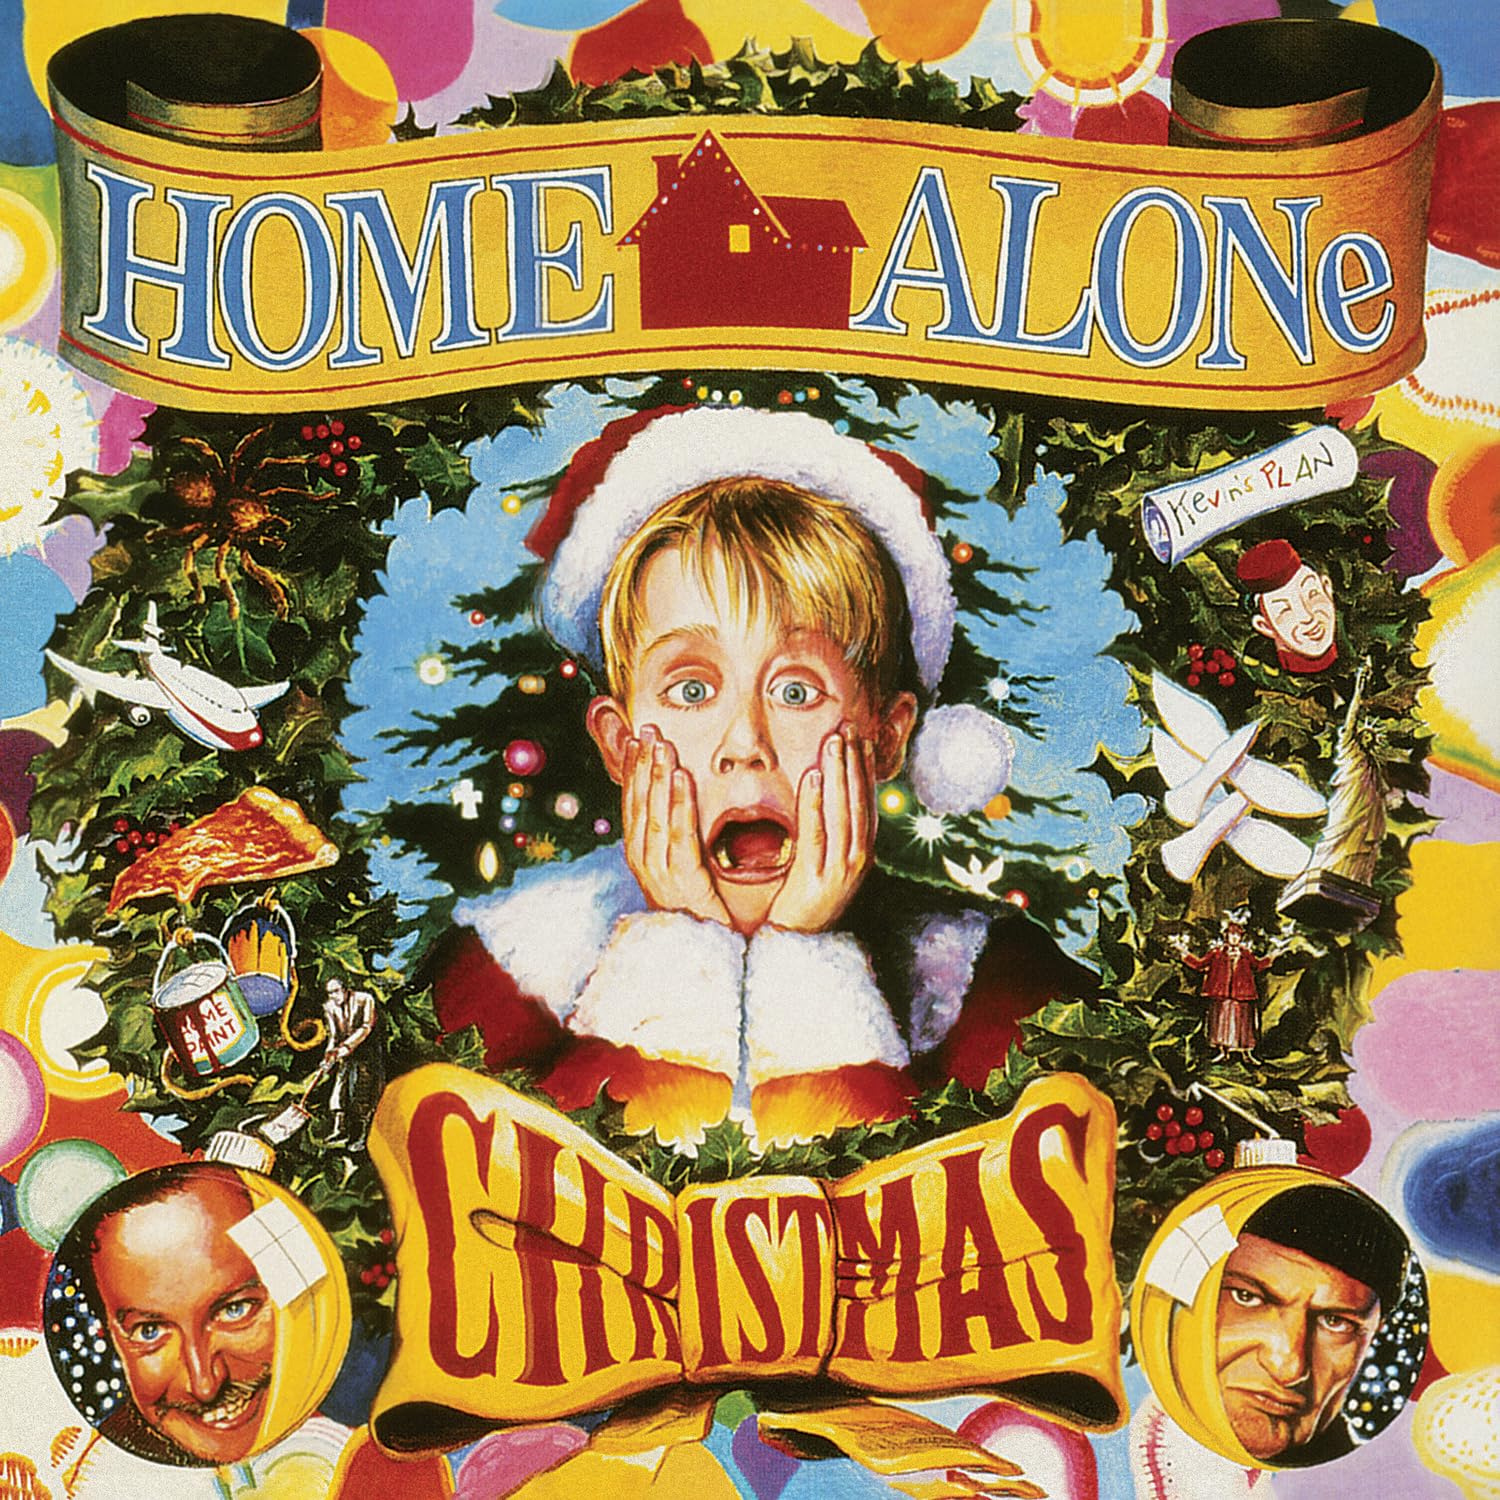 Various Artists - Home Alone Christmas vinyl cover